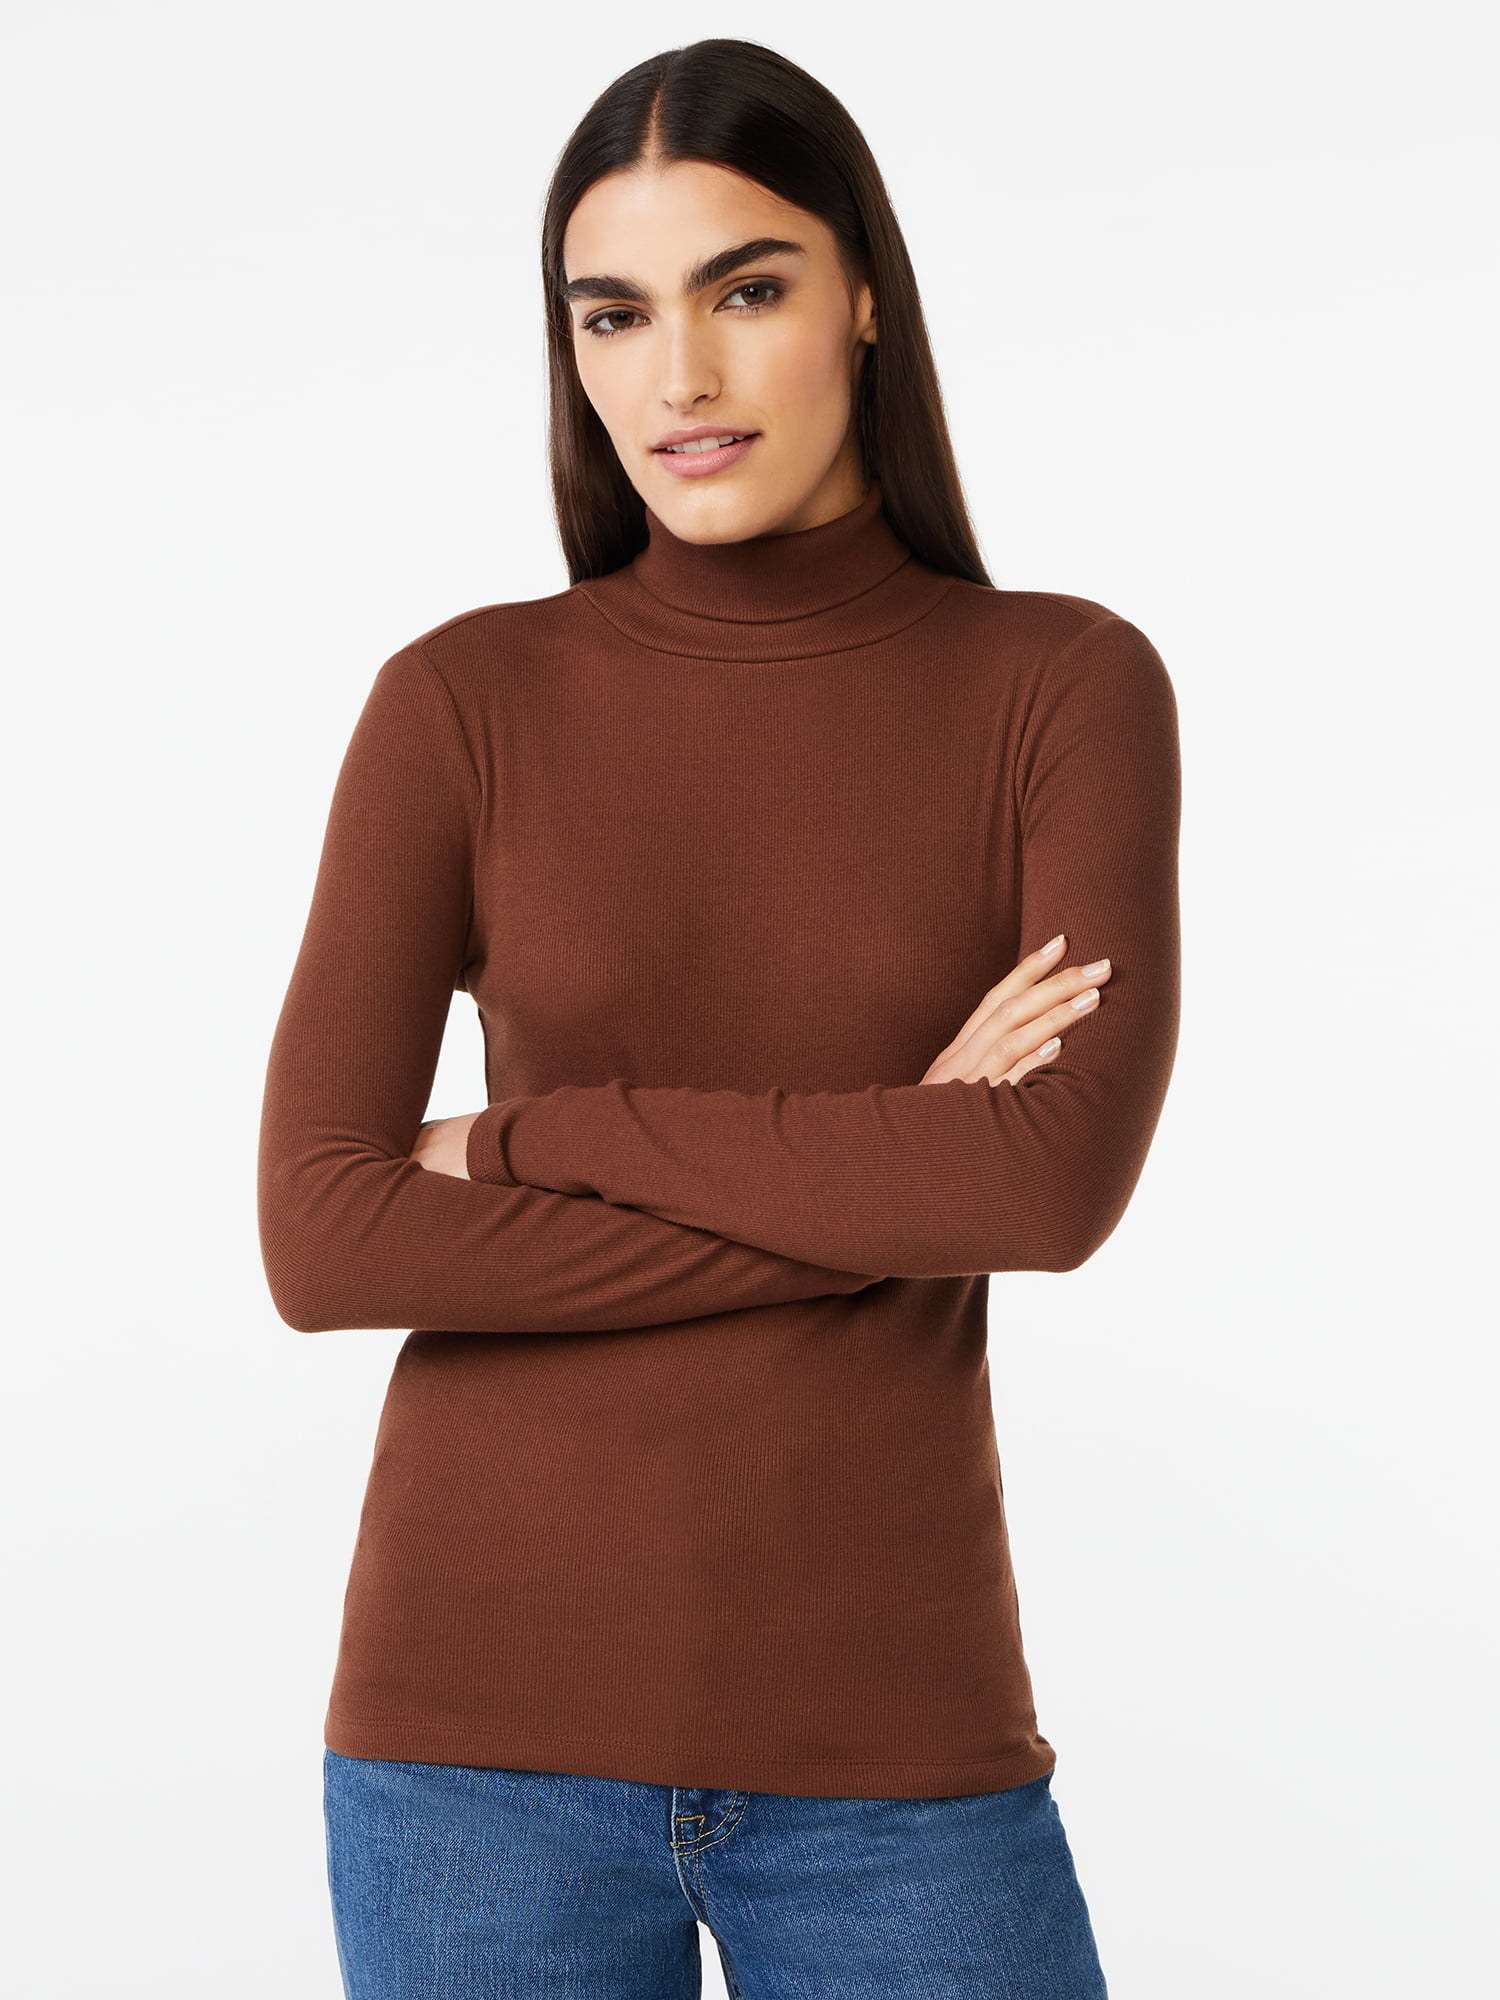 a model wearing the brown turtleneck